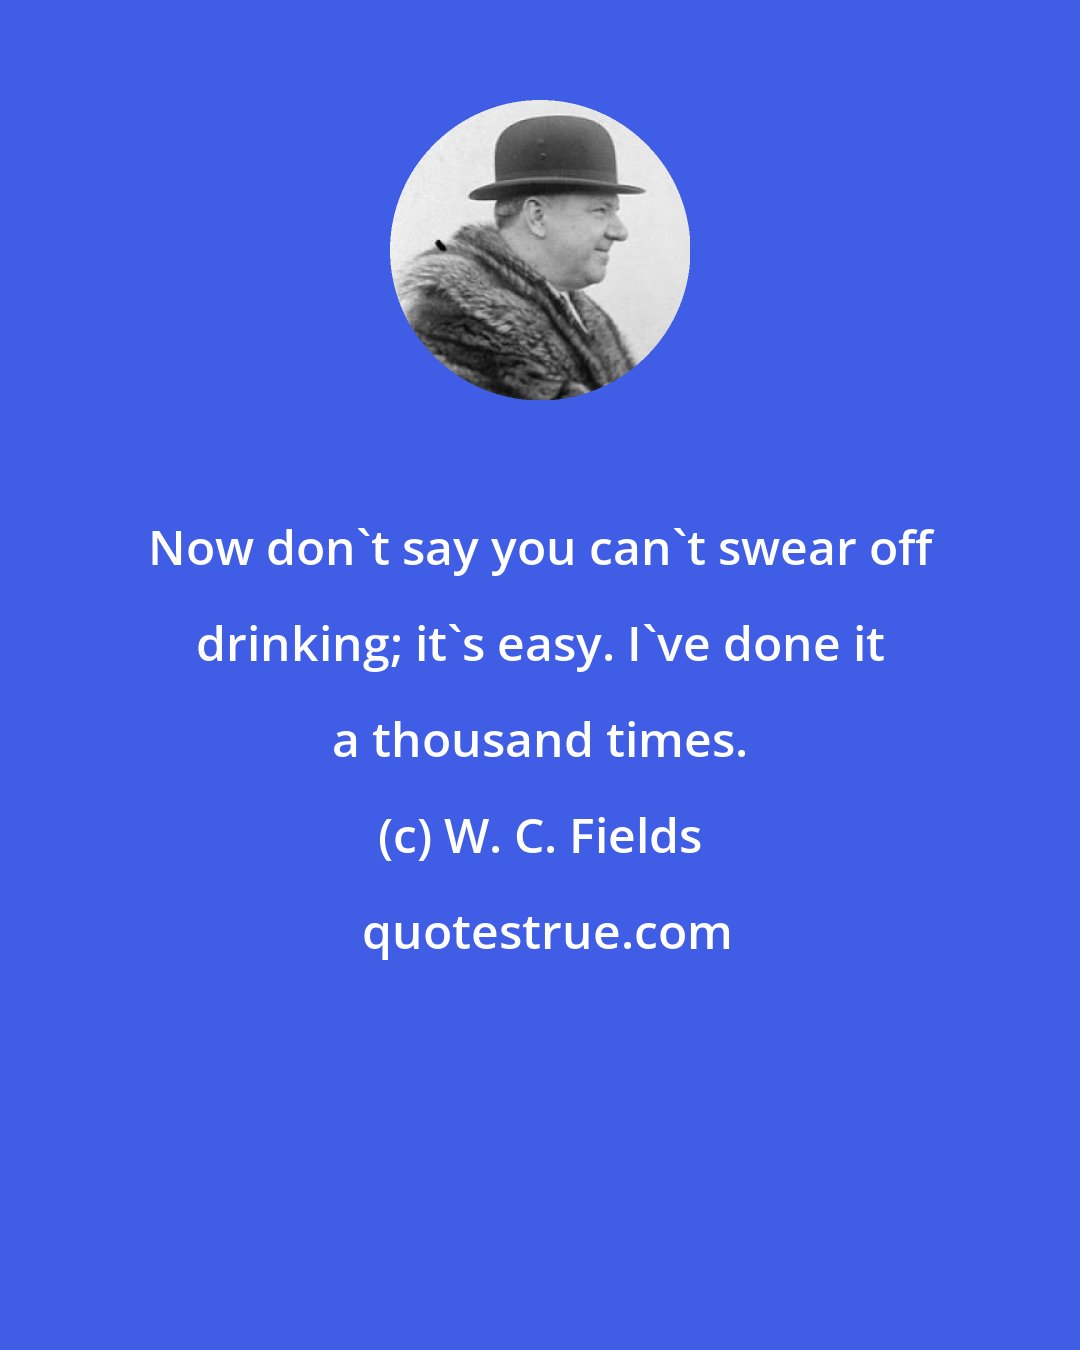 W. C. Fields: Now don't say you can't swear off drinking; it's easy. I've done it a thousand times.